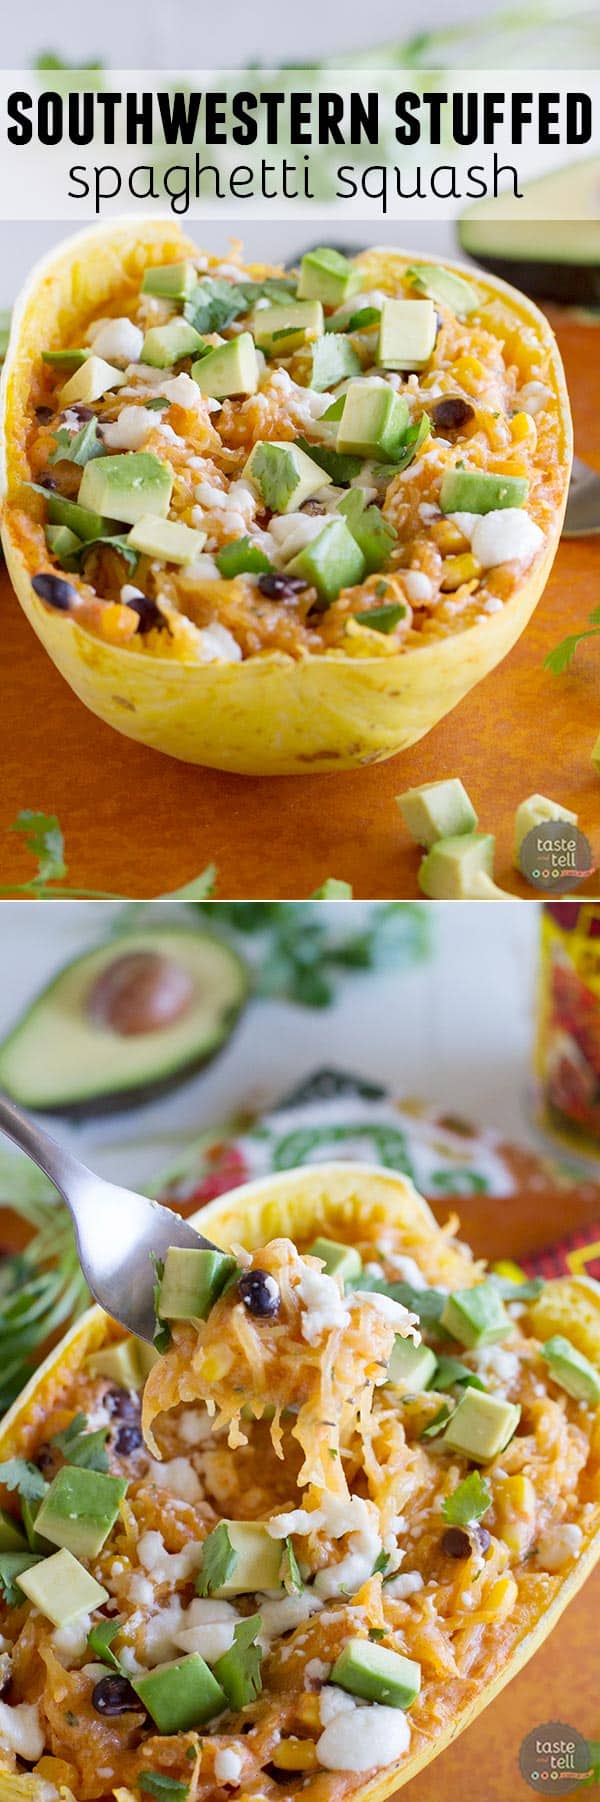 Southwestern Stuffed Spaghetti Squash -  This Southwestern inspired stuffed spaghetti squash is a great way to change things up for a meatless meal during the week.  It’s easy and fast and good for you!